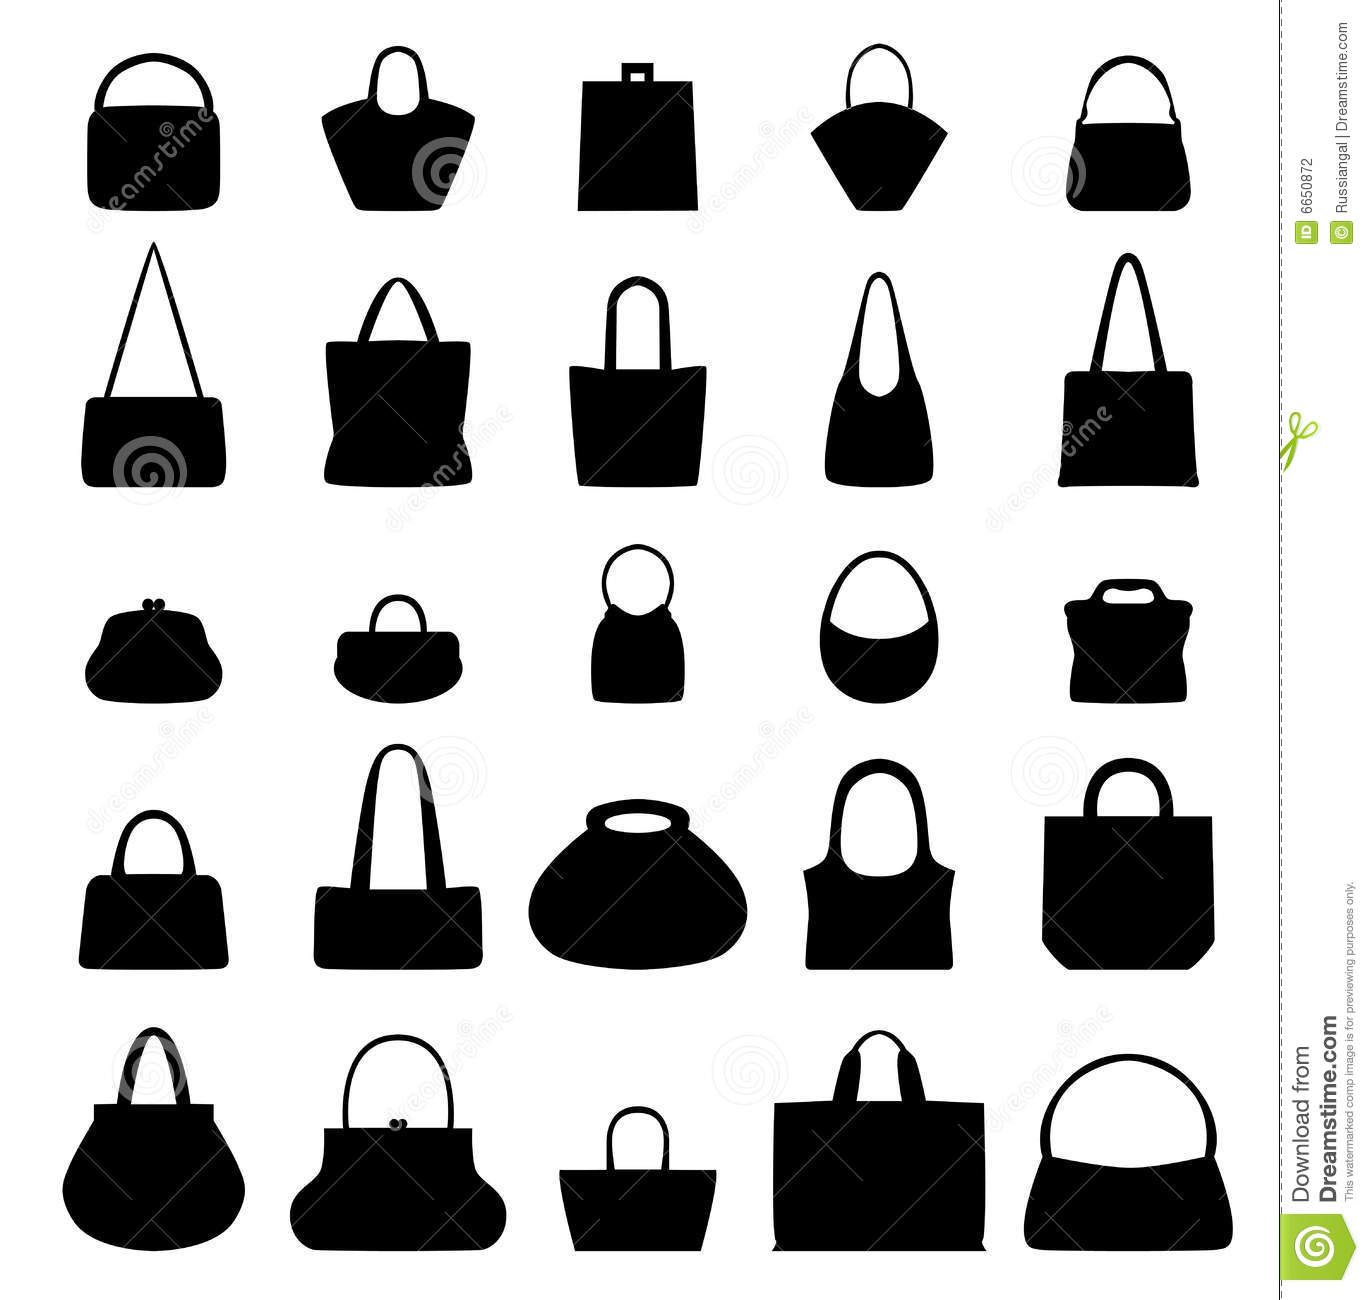 Execution Of 25 Different Purses And Handbags